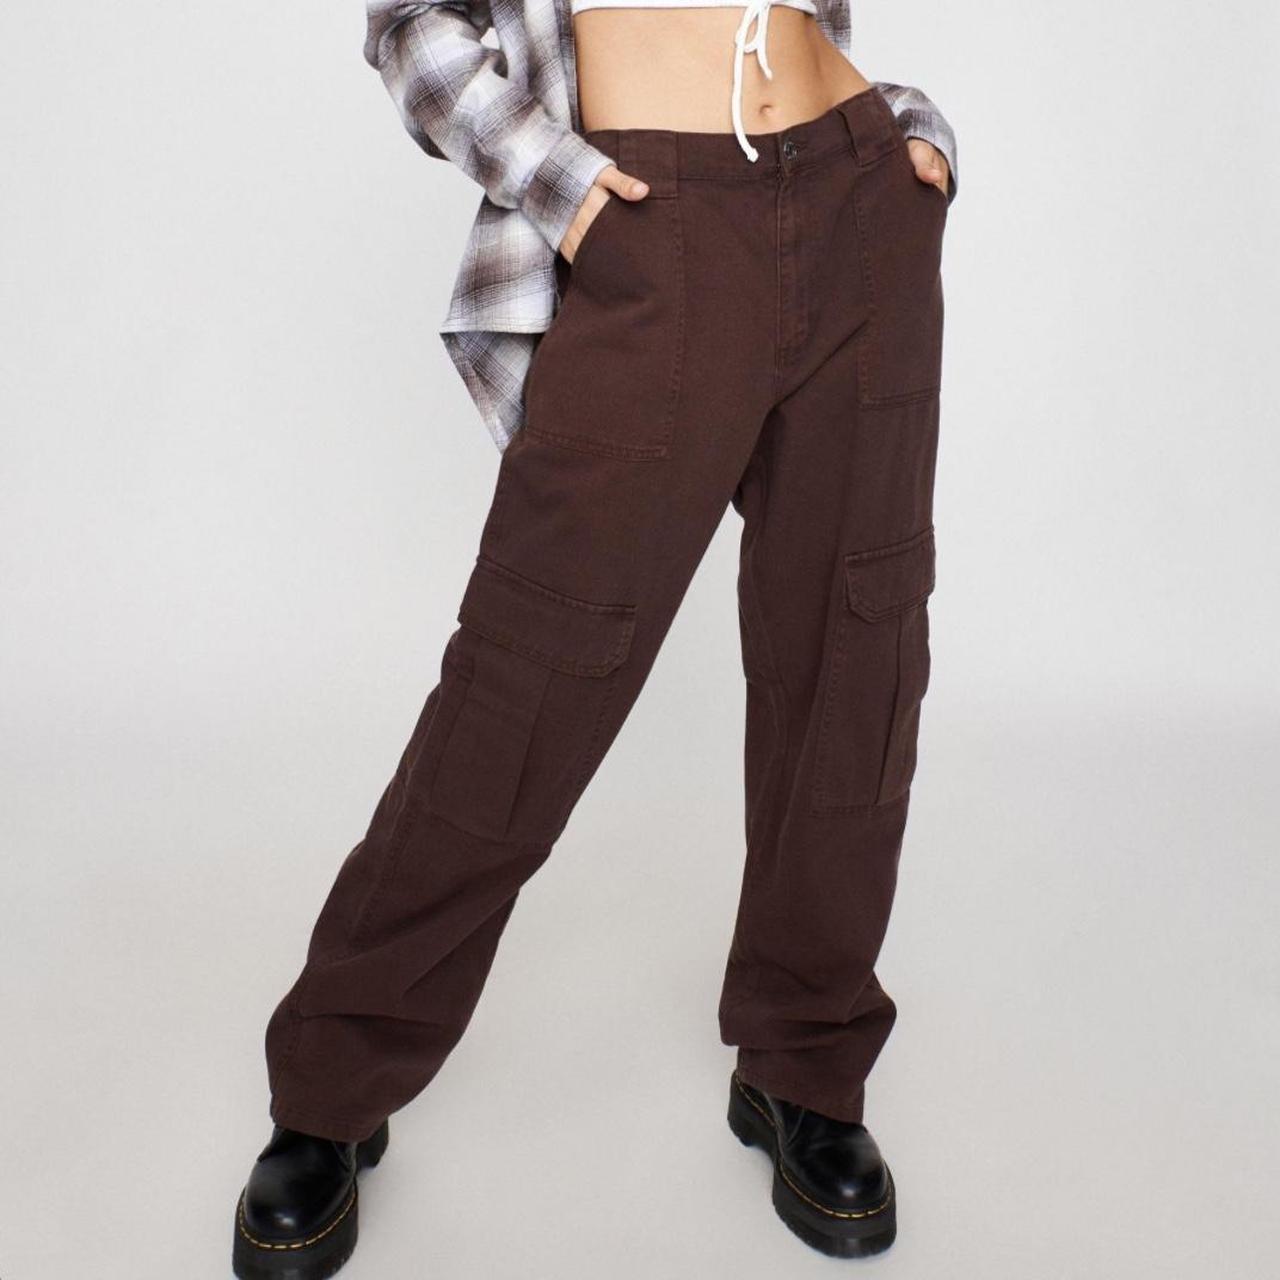 Clothes from garage  Brown pants outfit, Clothes, Pants for women